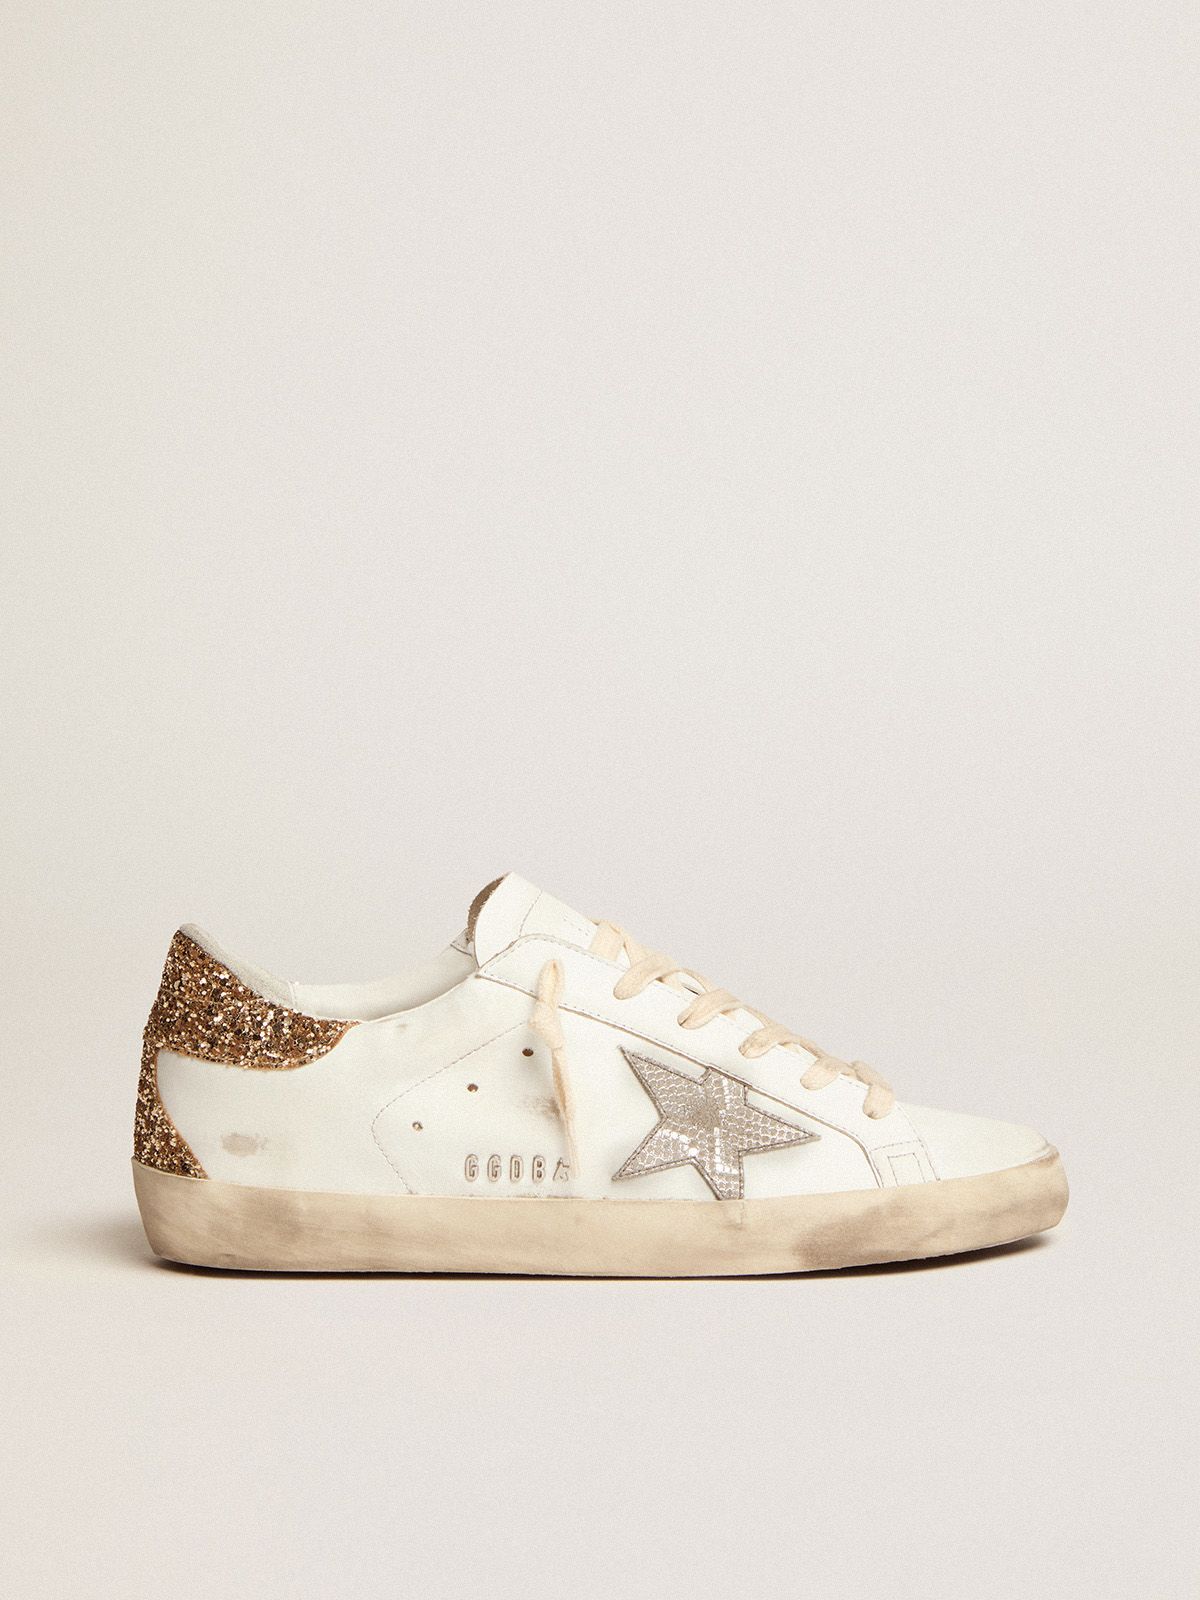 golden goose gold tab snake-print leather heel silver and star with Super-Star sneakers glitter